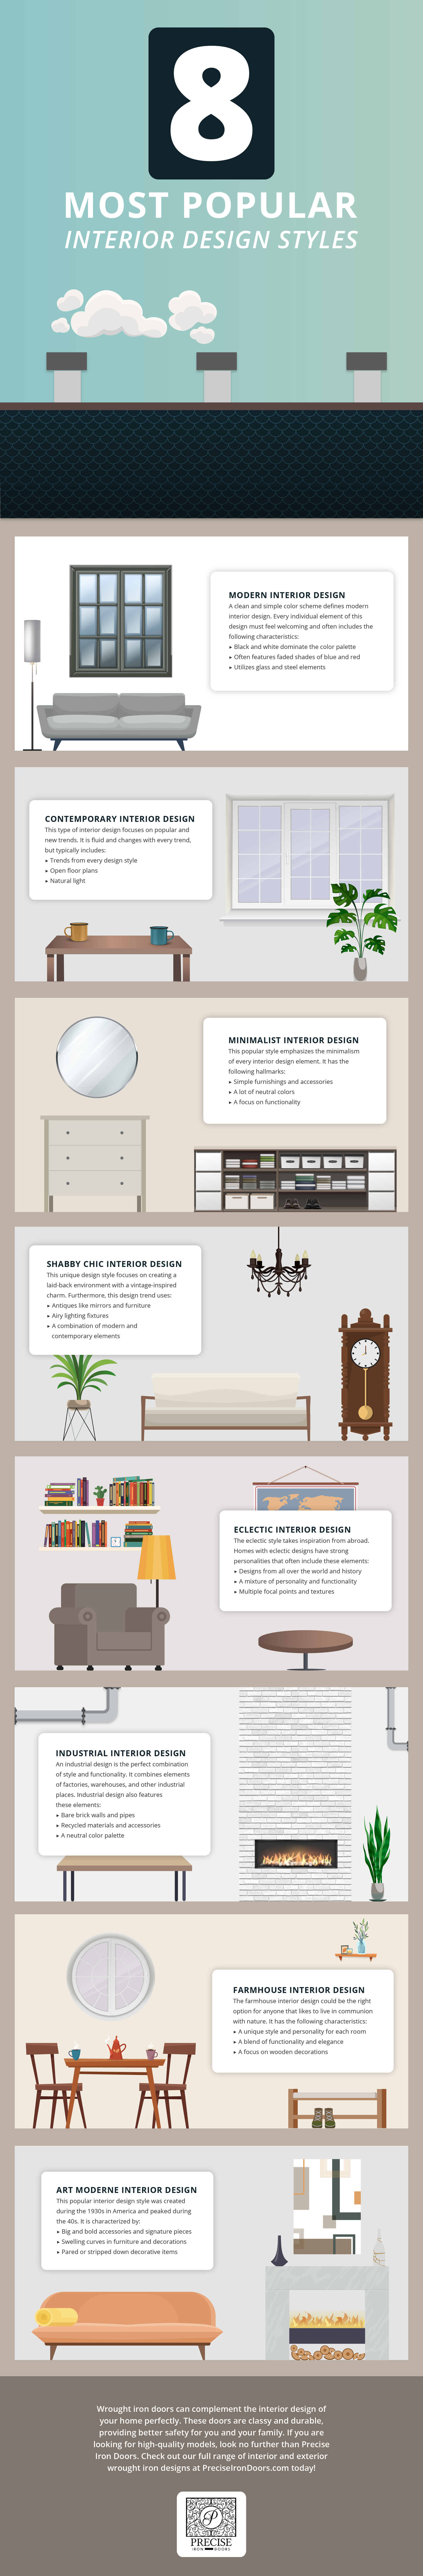 What Are The Most Popular Interior Design Styles?